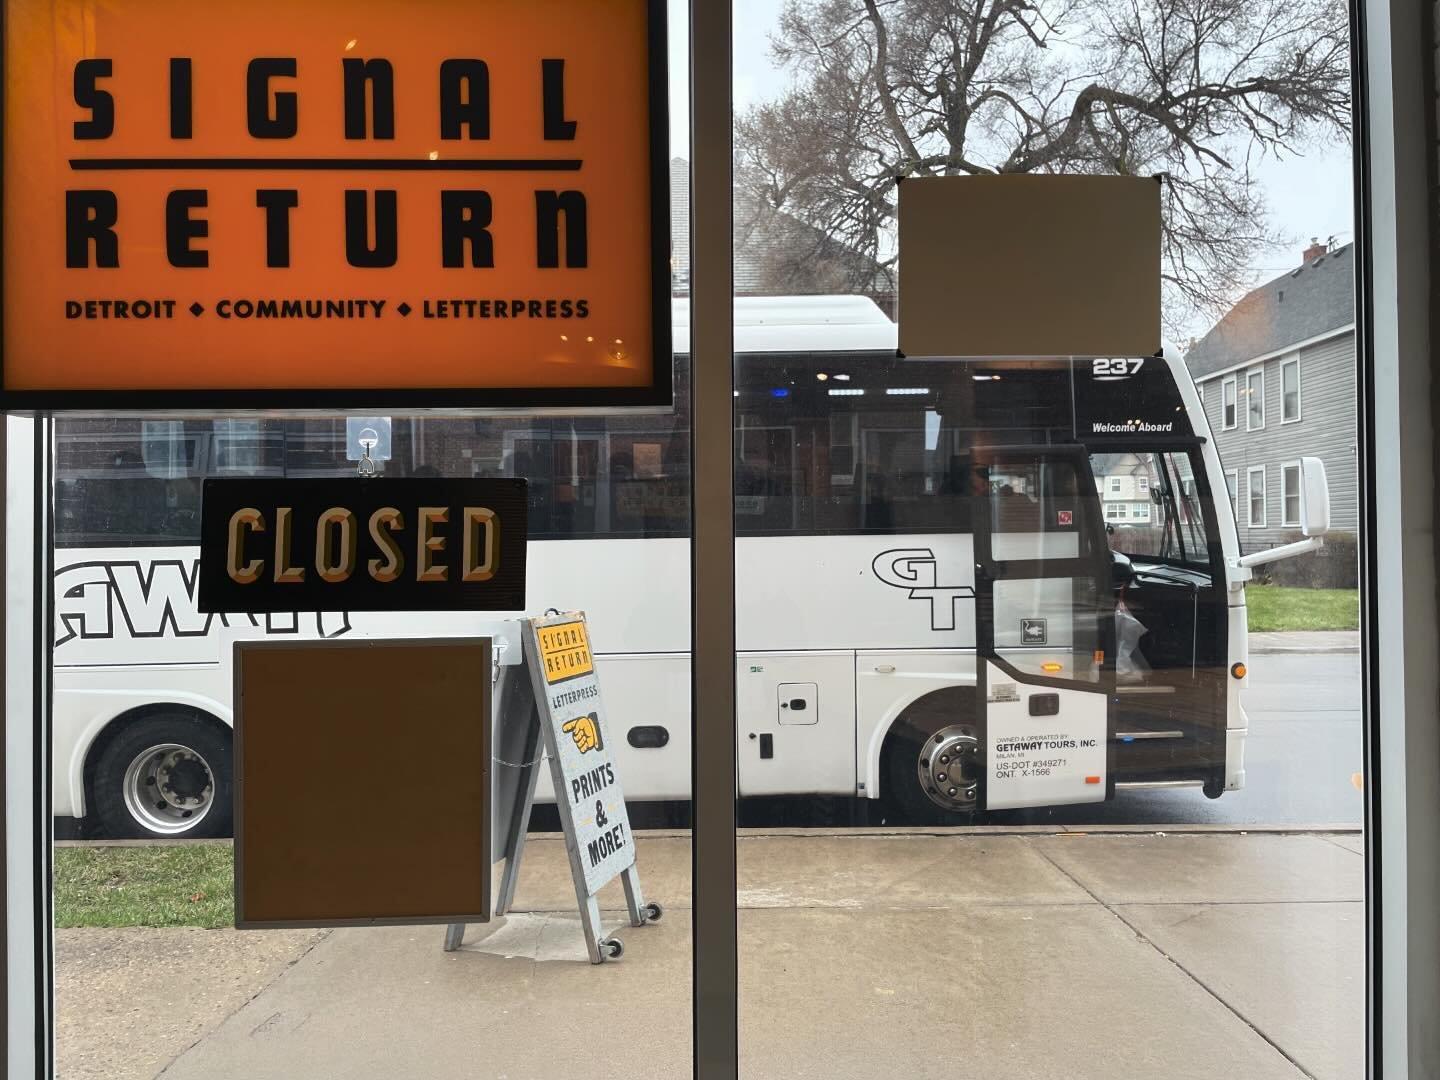 From the inside the sign says closed, but we were open for business when the students of the Livonia Career Technical Center rolled up for their morning workshop!